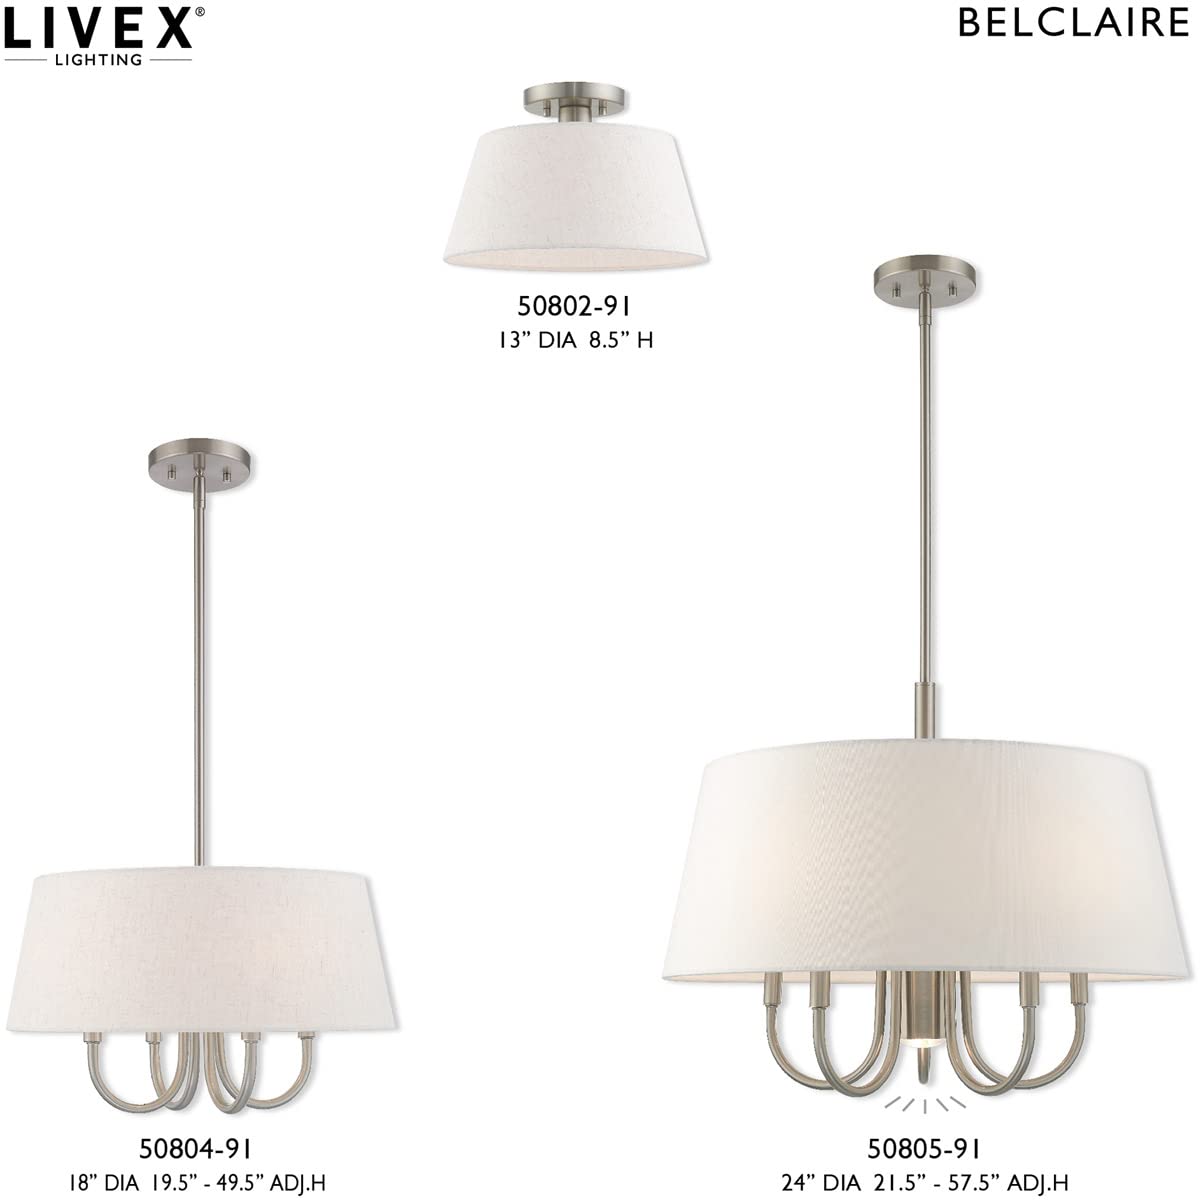 Livex Lighting 50805-91 Belclaire - Six Light Chandelier, Brushed Nickel Finish with Oatmeal Fabric Shade